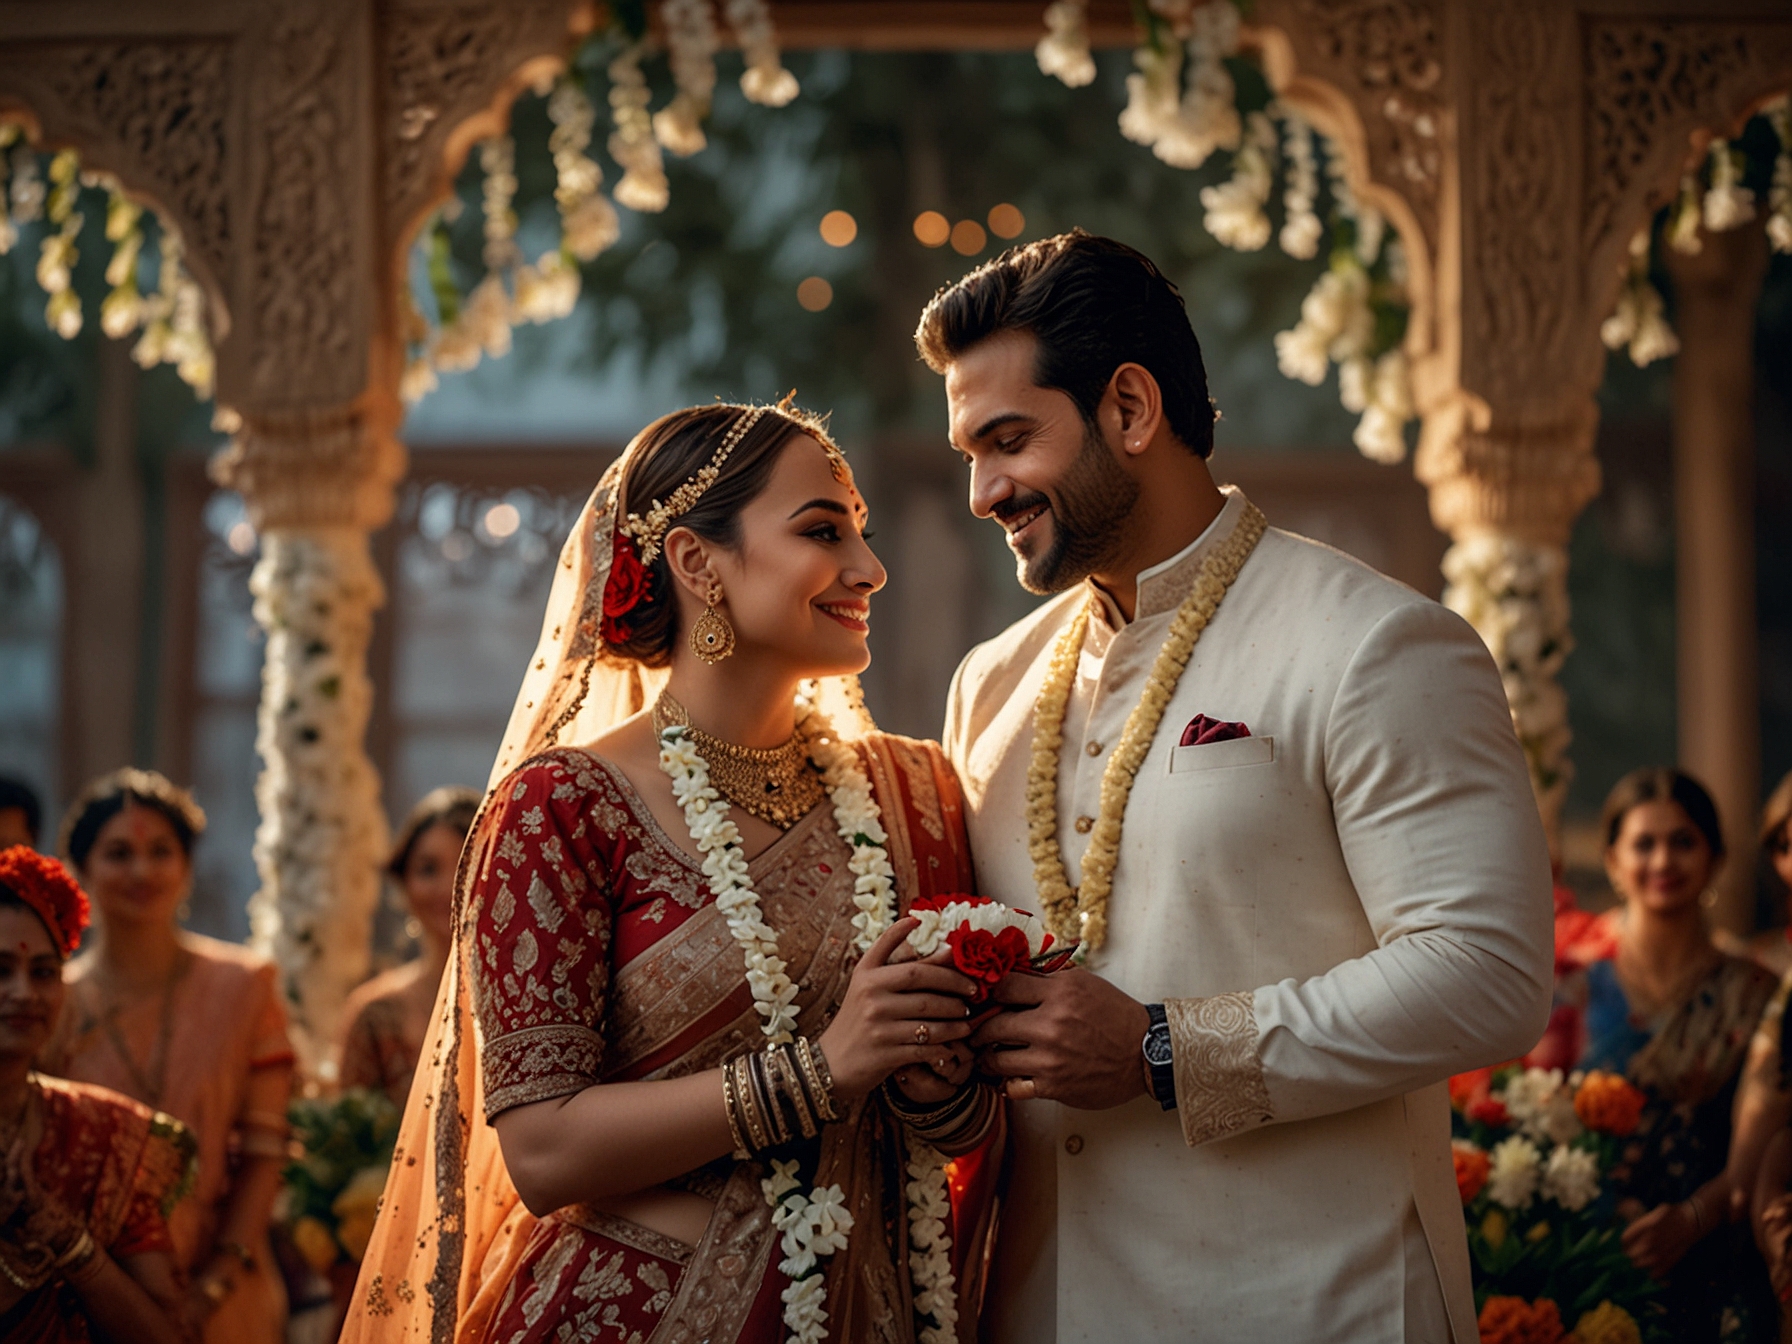 Sonakshi Sinha and Zaheer Iqbal exchange vows in a beautifully decorated venue filled with floral arrangements, capturing their blissful moments in traditional and elegant attire.